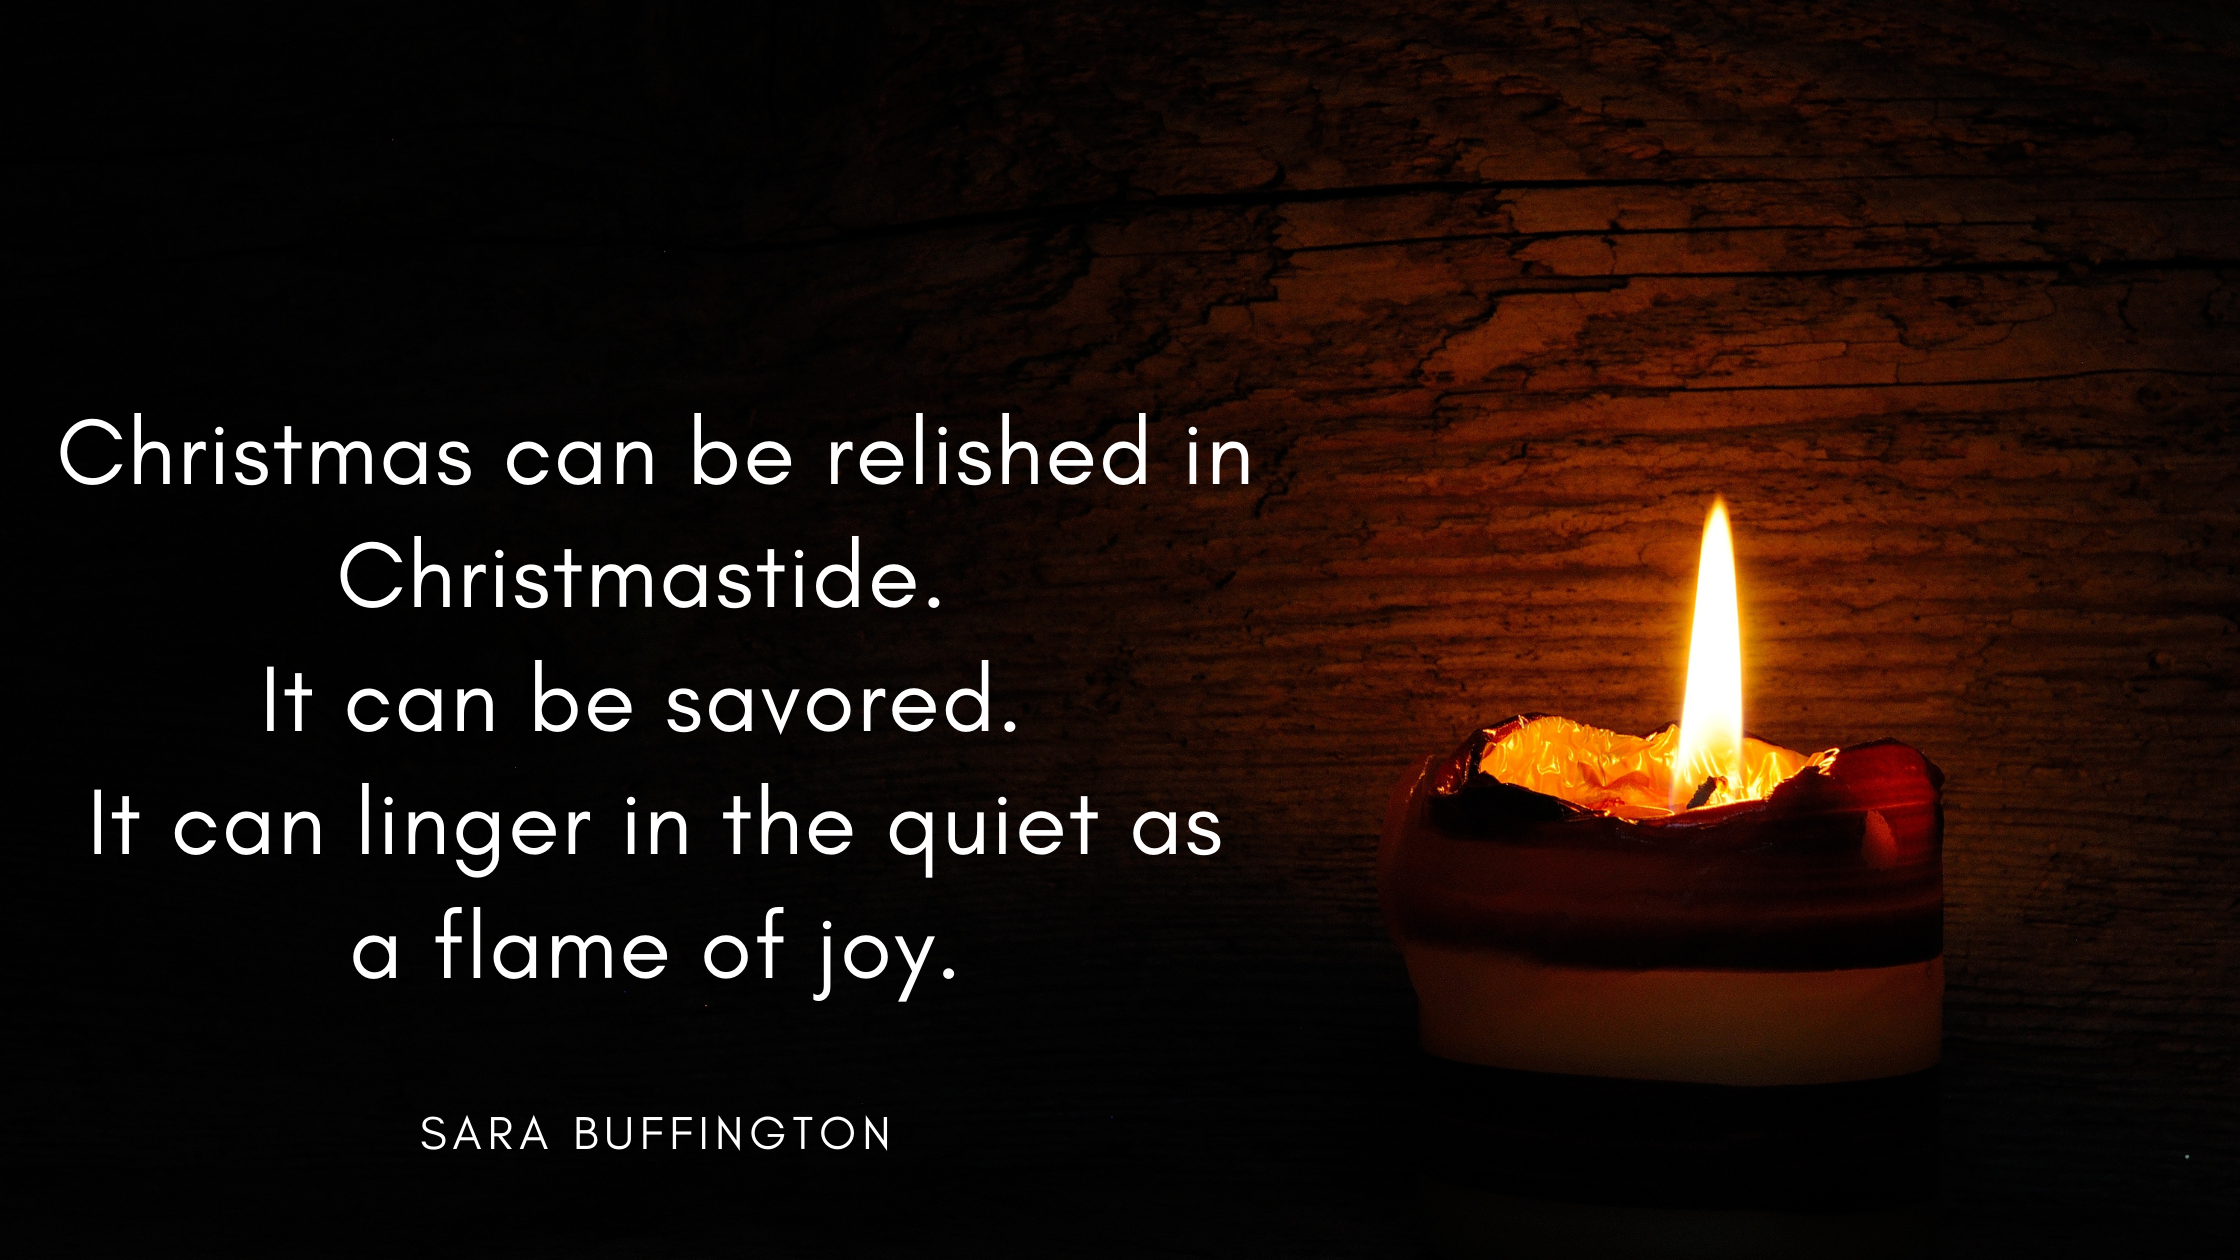 Christmas can be relished in Christmastide. It can be savored. It can linger in the quiet as a flame of joy.